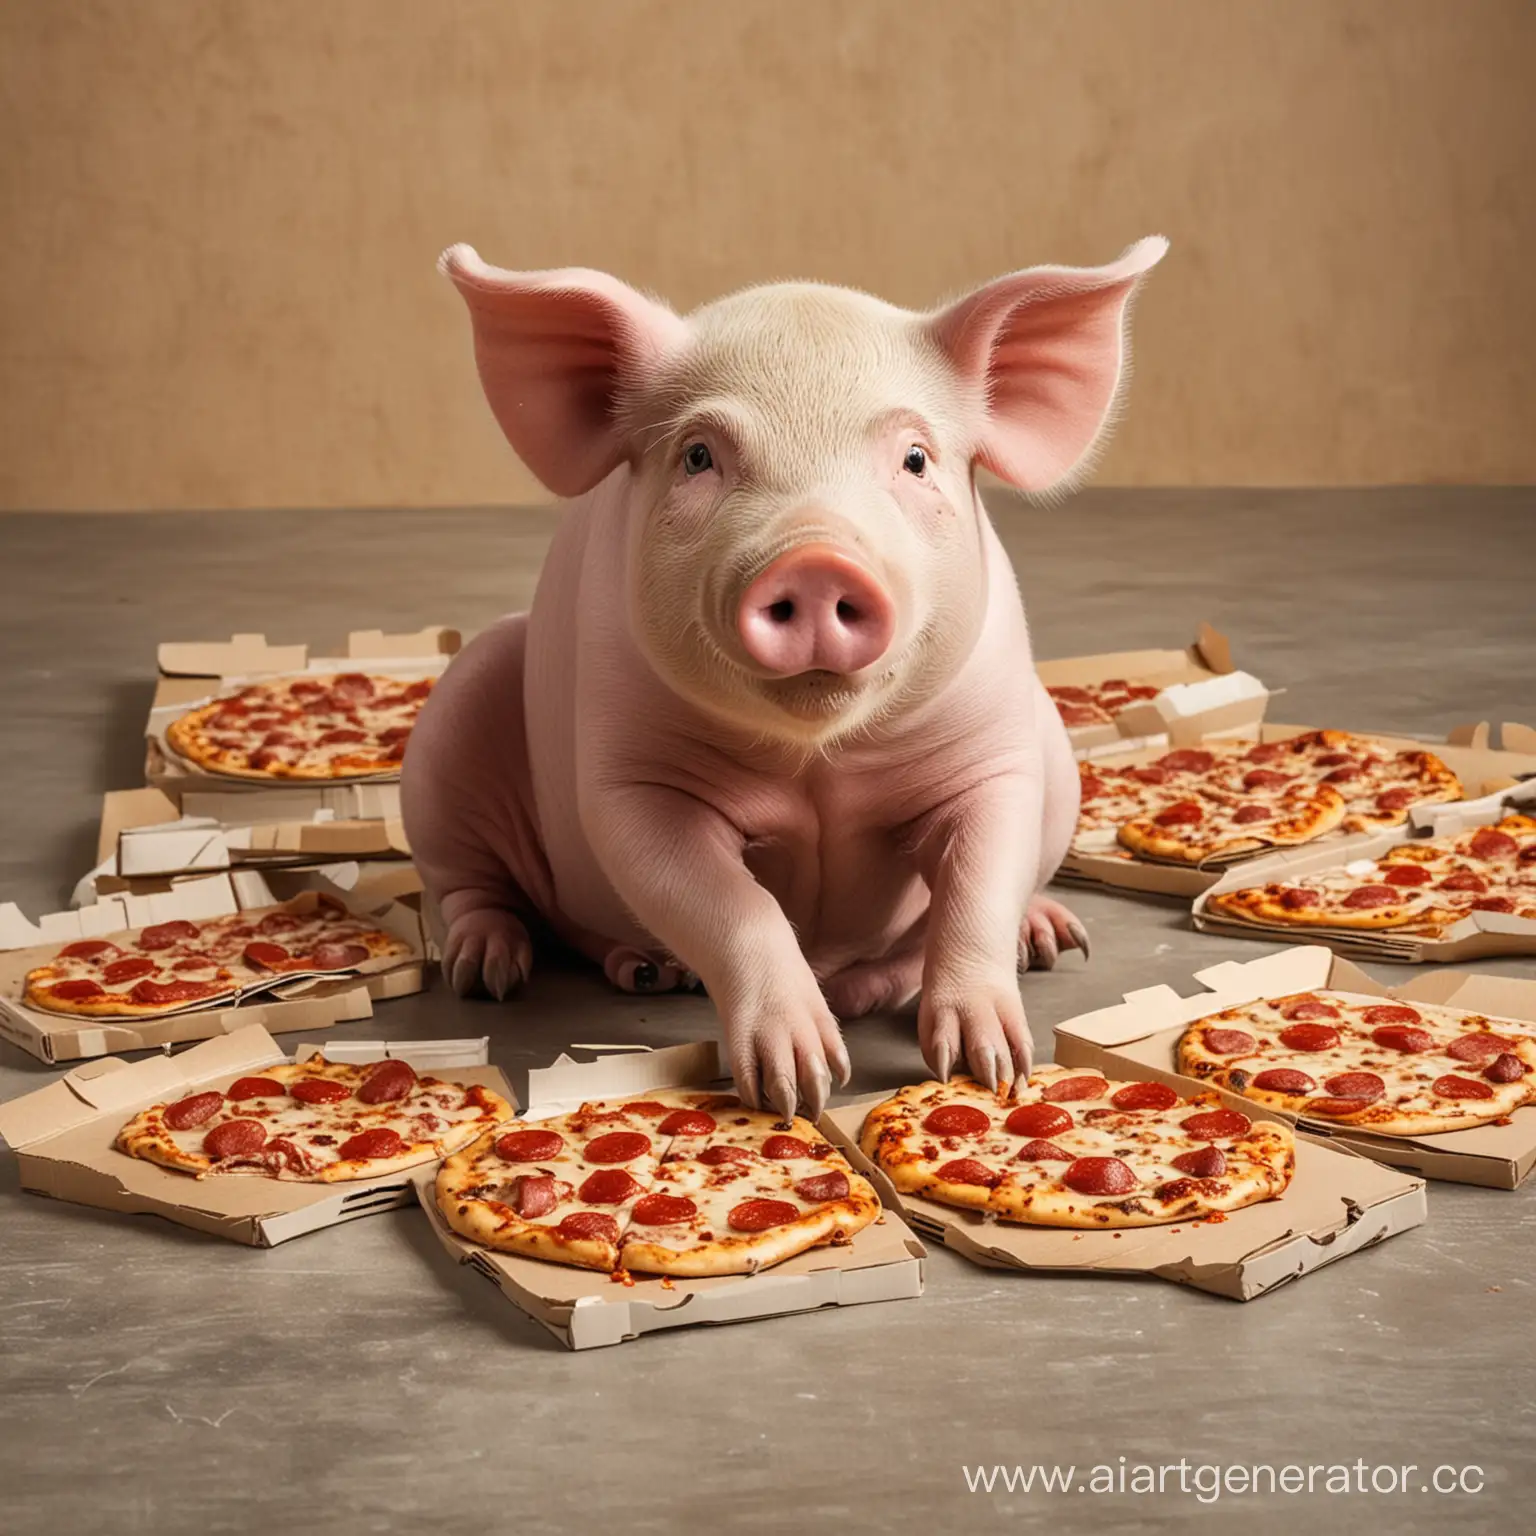 Adorable-Pig-Eating-Pizza-Surrounded-by-Pizza-Boxes